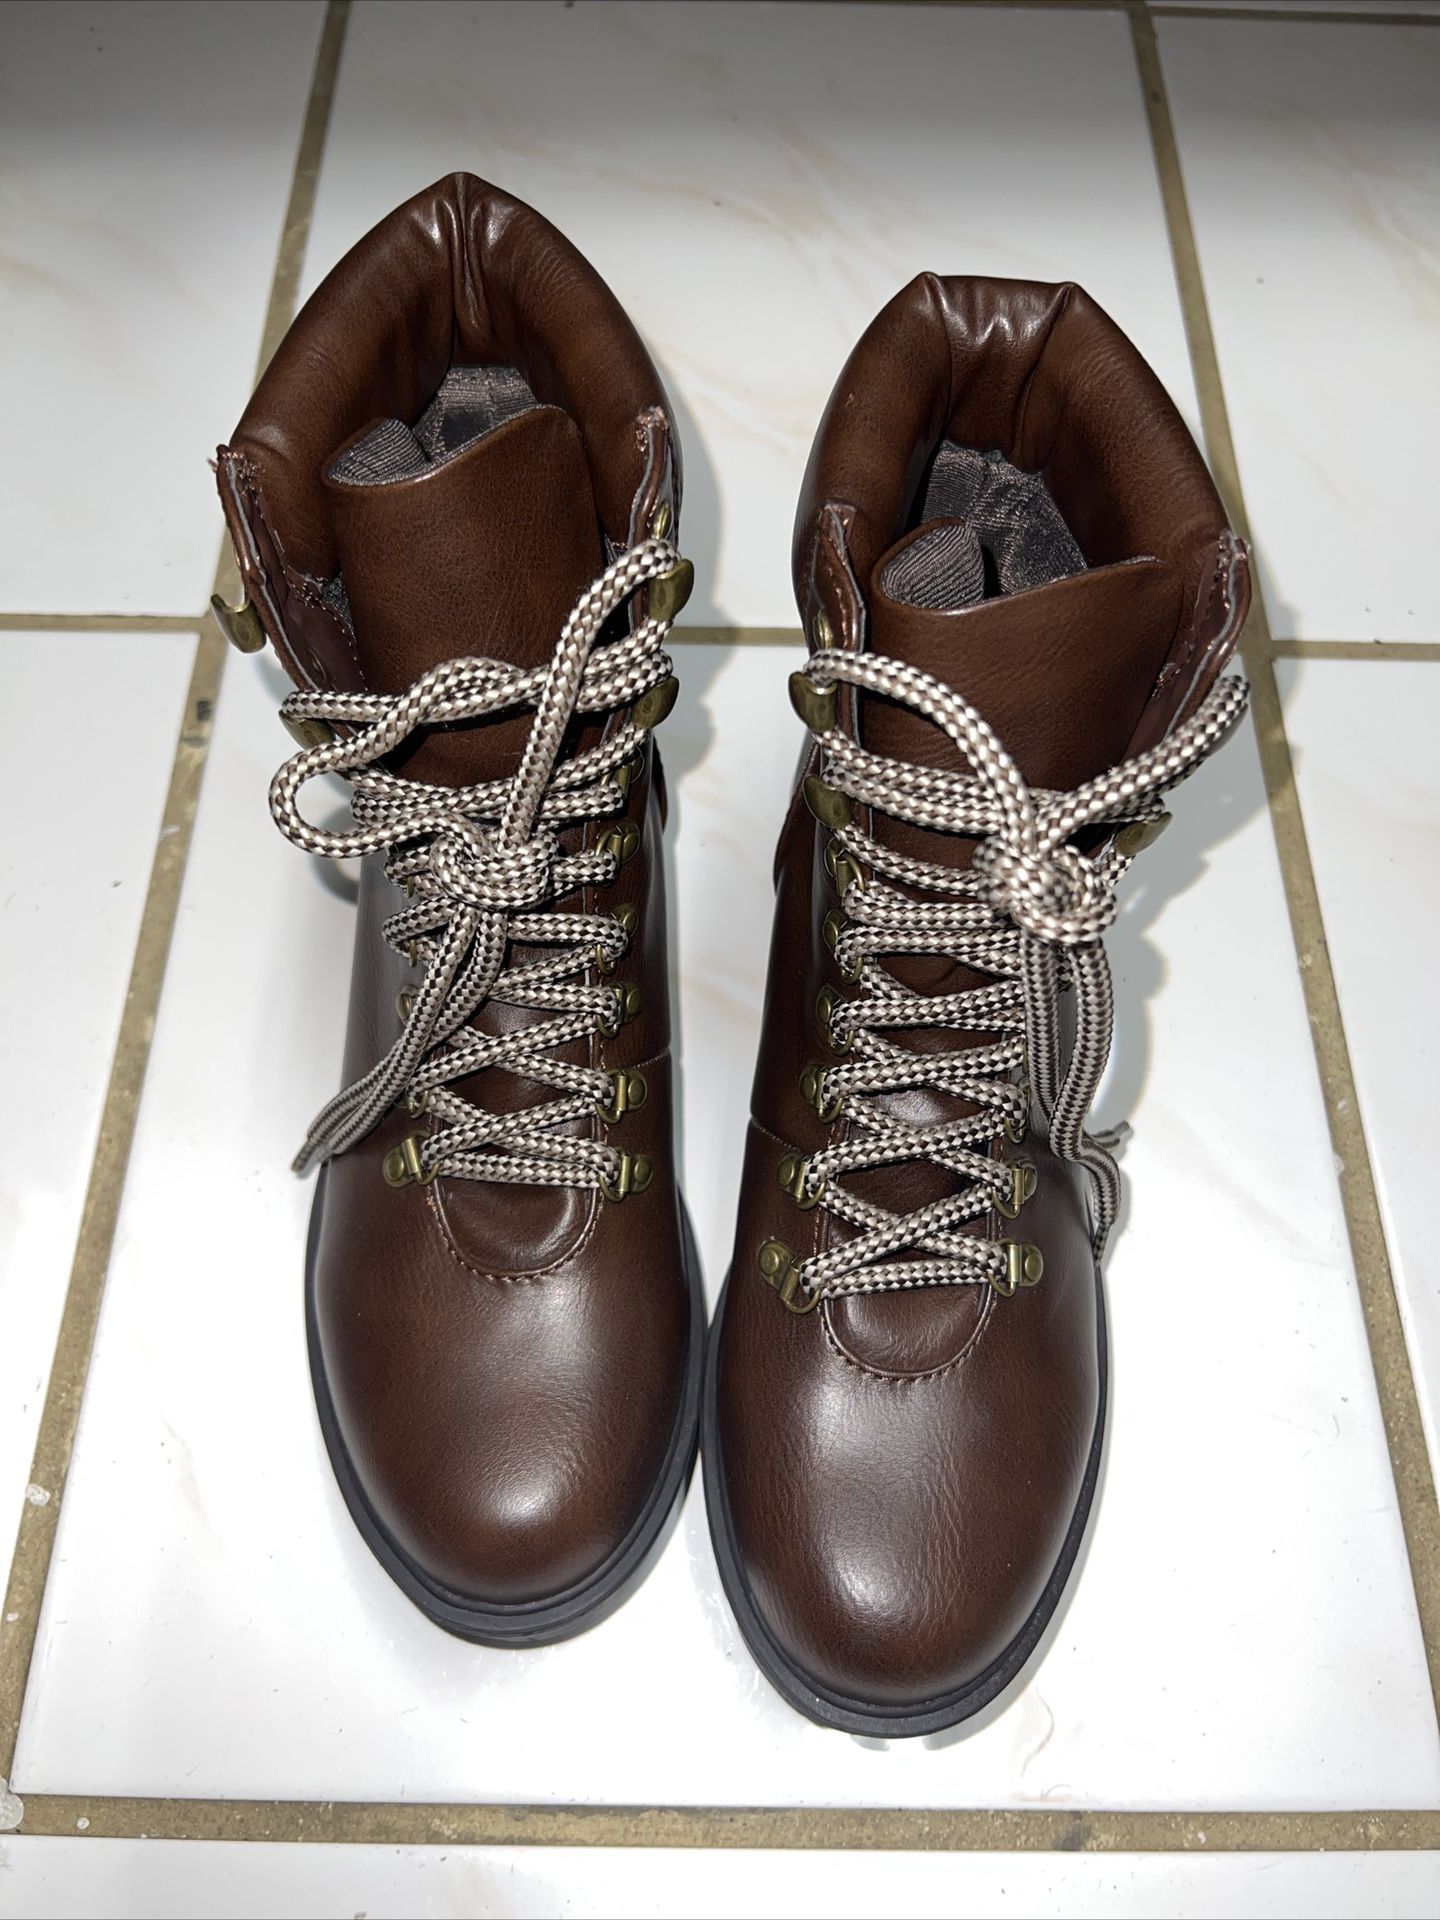 👢Women Lace-Up Combat Military Ankle Boots-Worn Once-Size 8